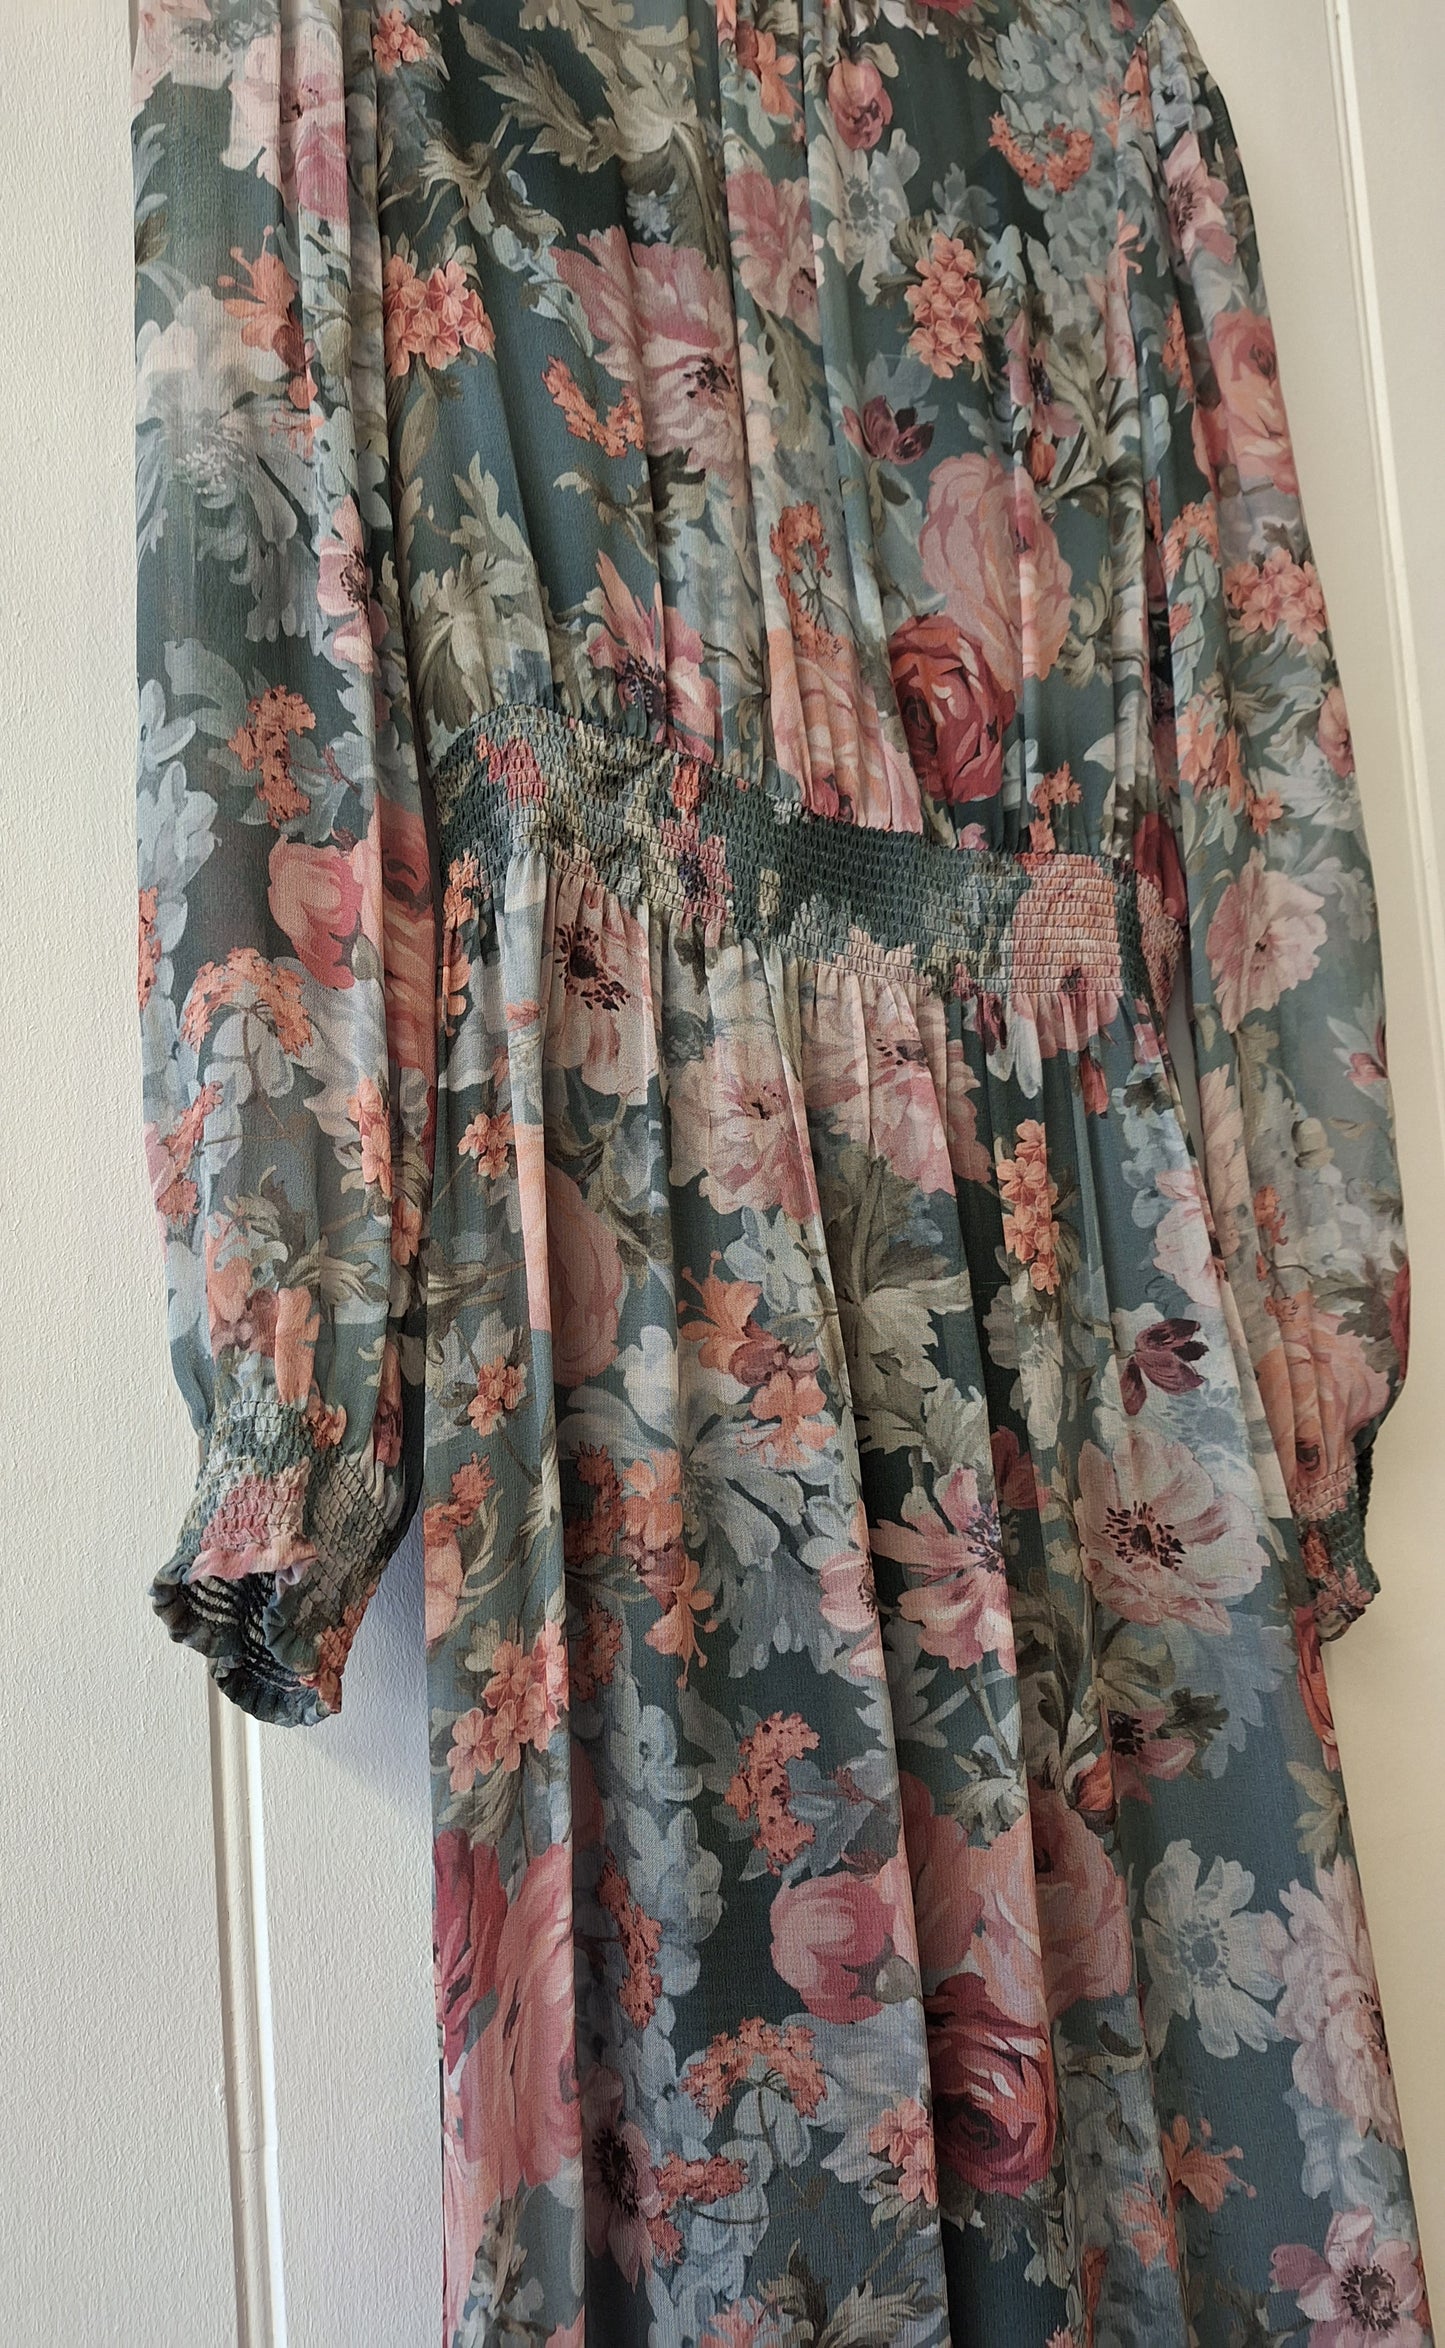 ZARA green and pink floral dress M